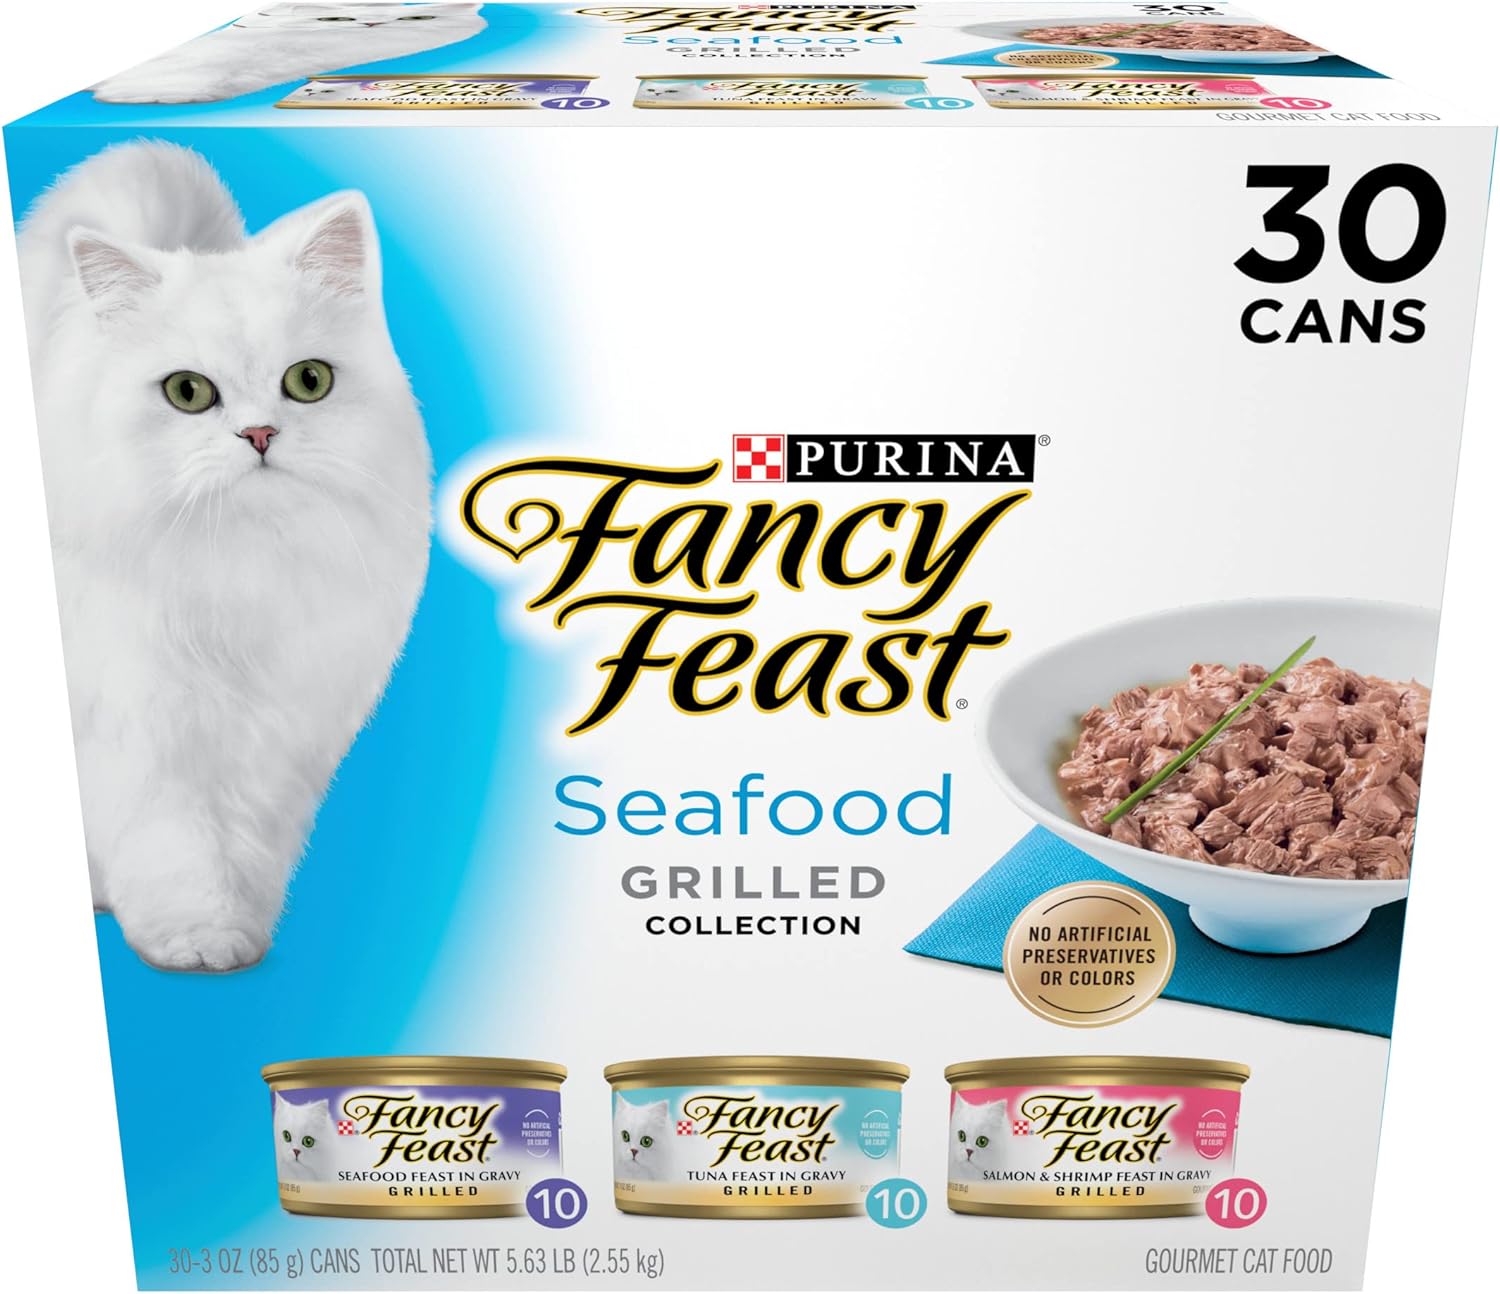 Purina Fancy Feast Grilled Wet Cat Food Seafood Collection in Wet Cat Food Variety Pack - (30) 3 oz. Cans